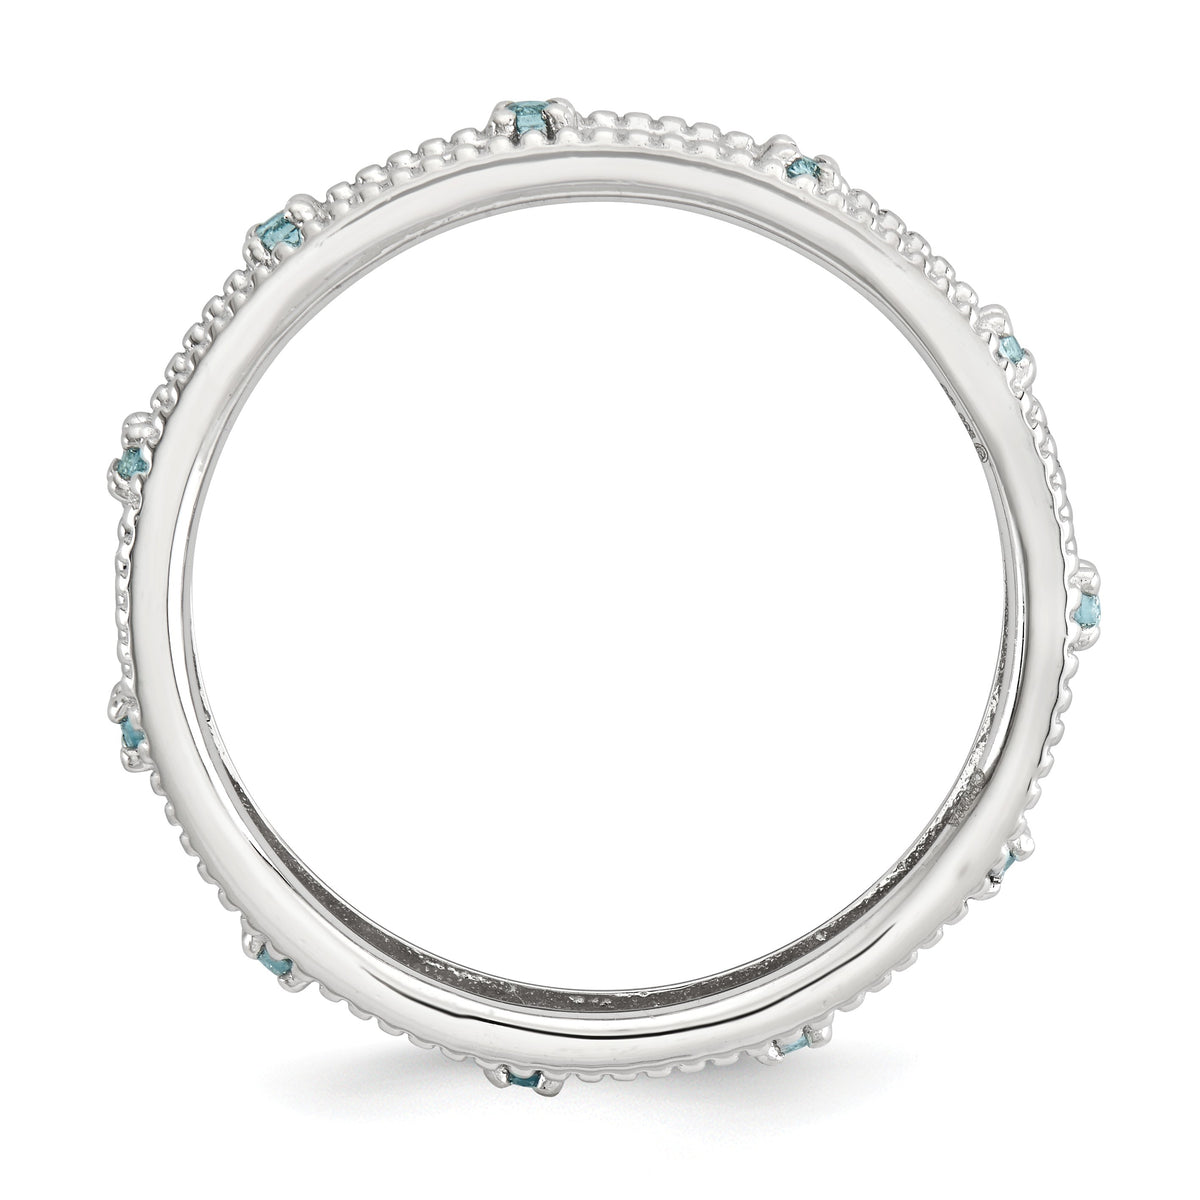 Alternate view of the 3mm Sterling Silver Stackable Expressions Aquamarine Scroll Band by The Black Bow Jewelry Co.